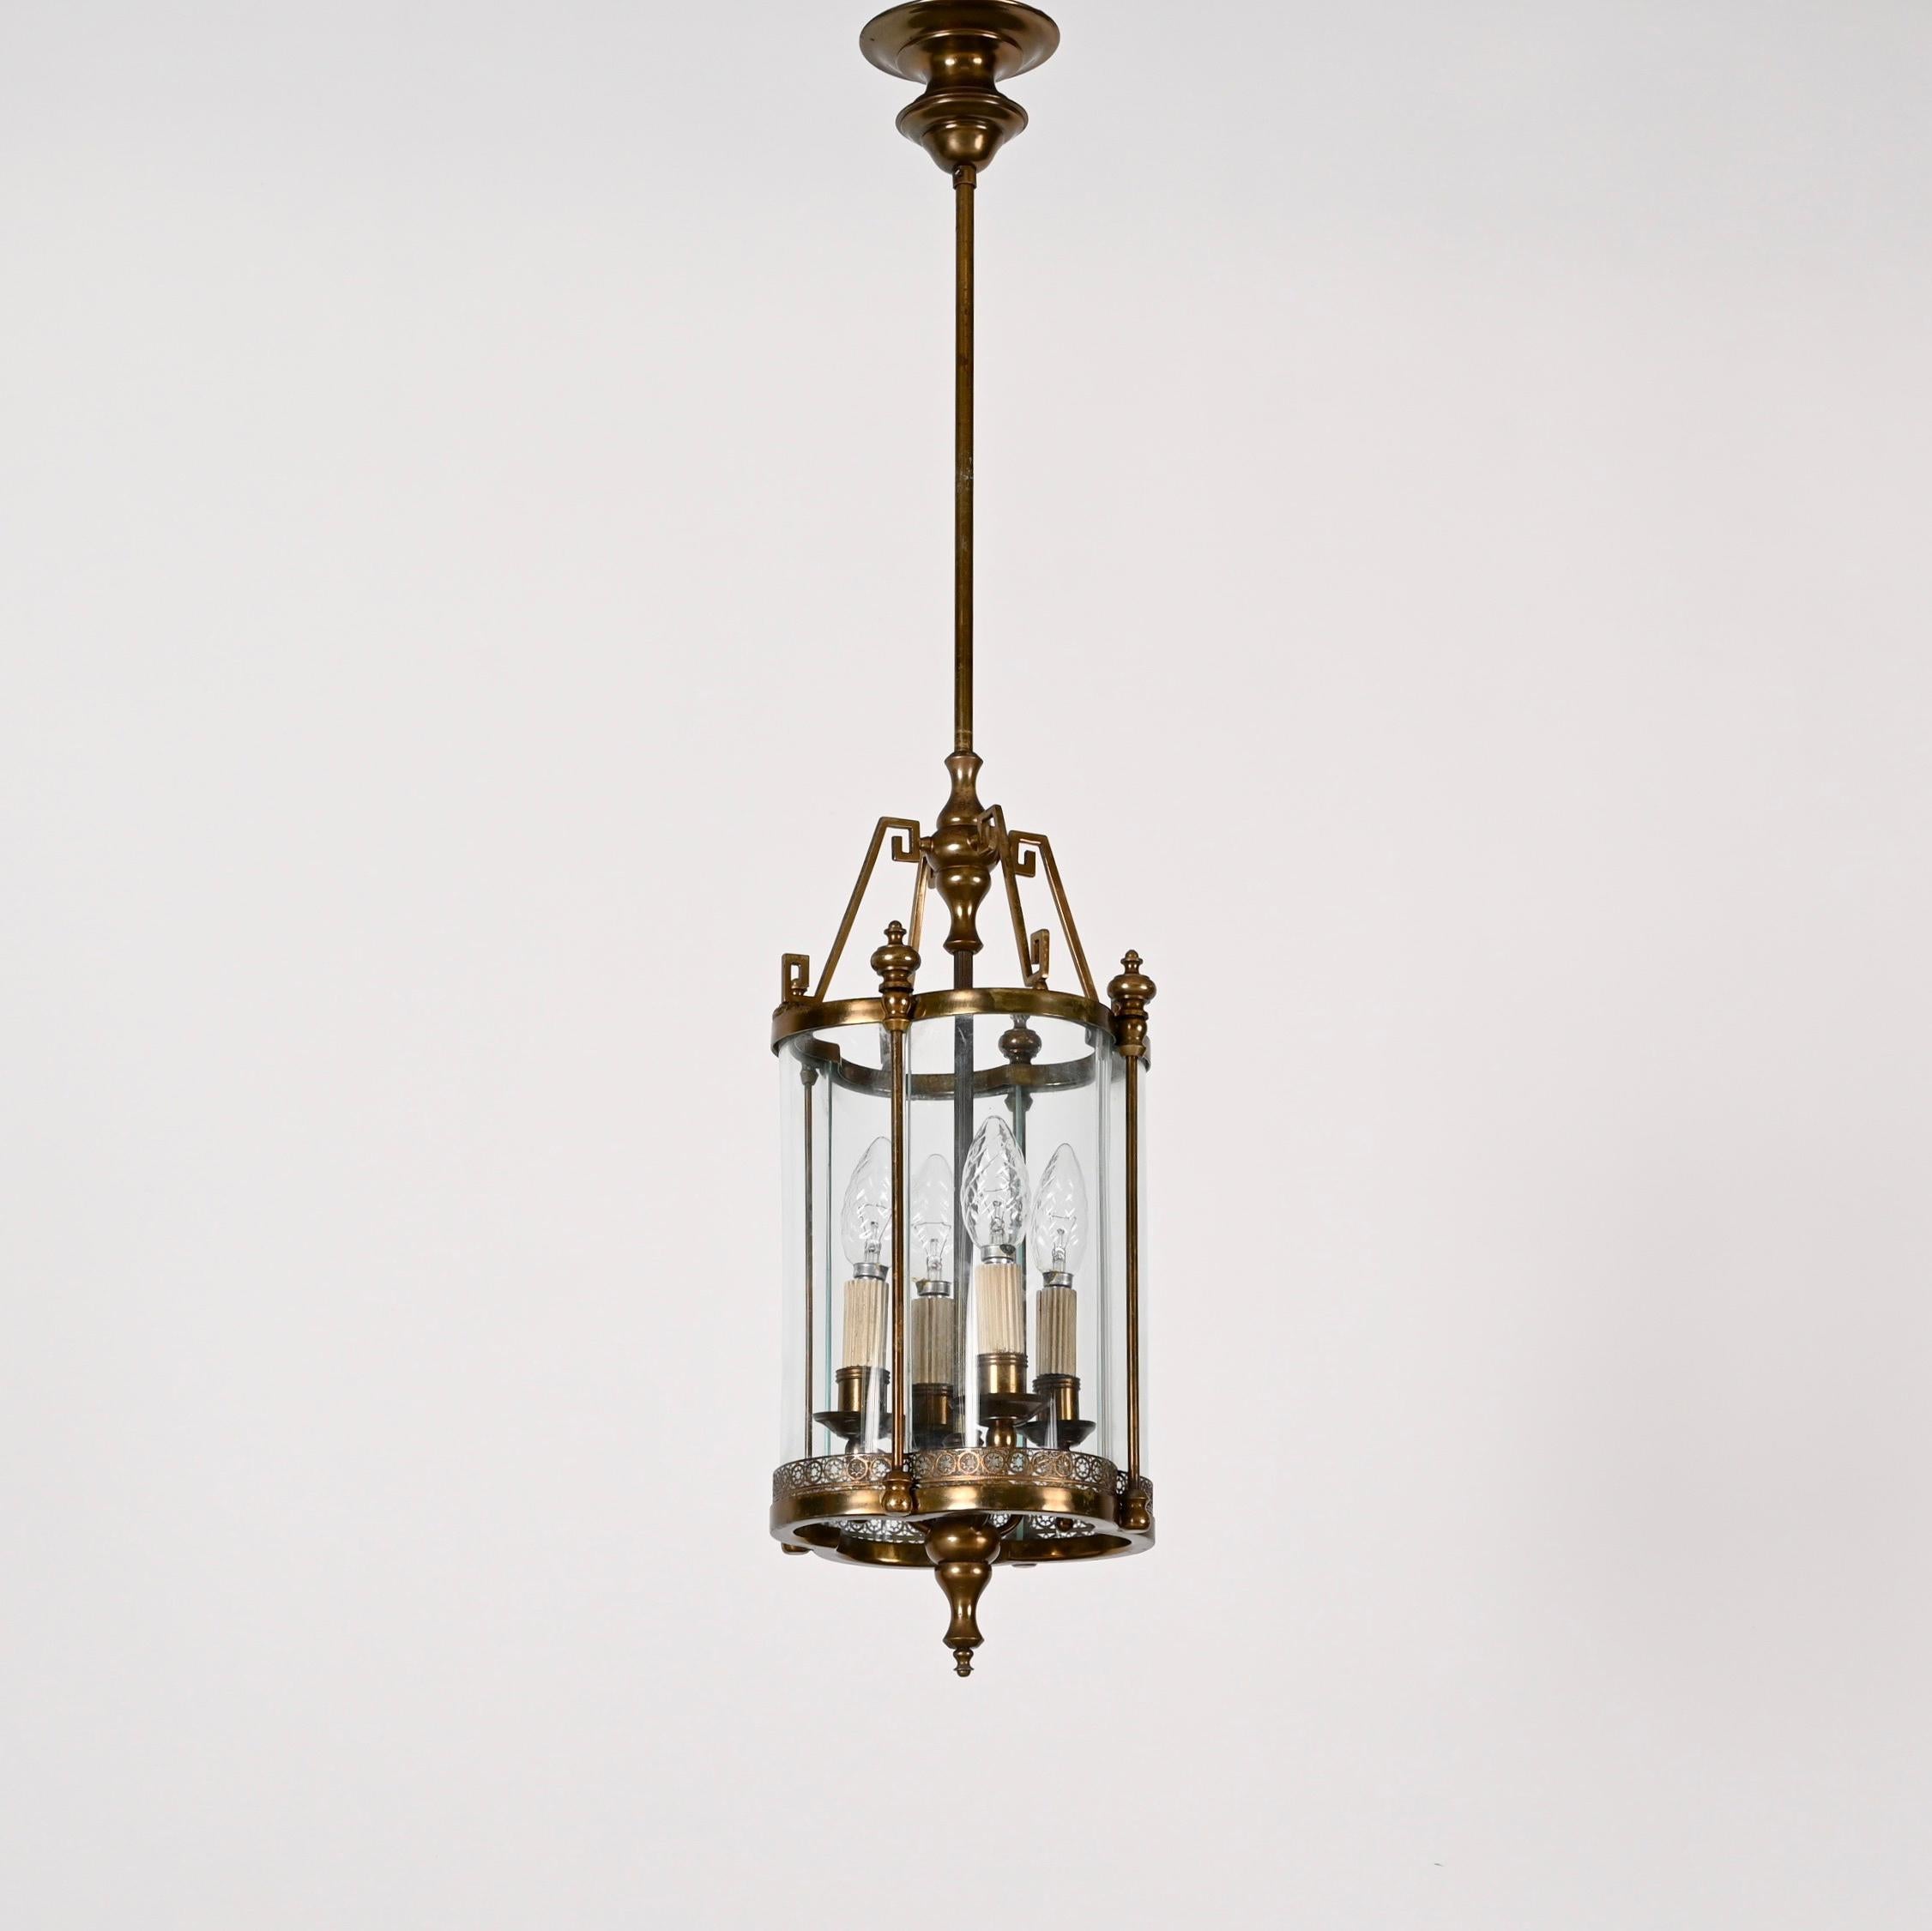 Art Deco Brass and Semicircular Glass Italian Chandelier after Adolf Loos, 1950s For Sale 5